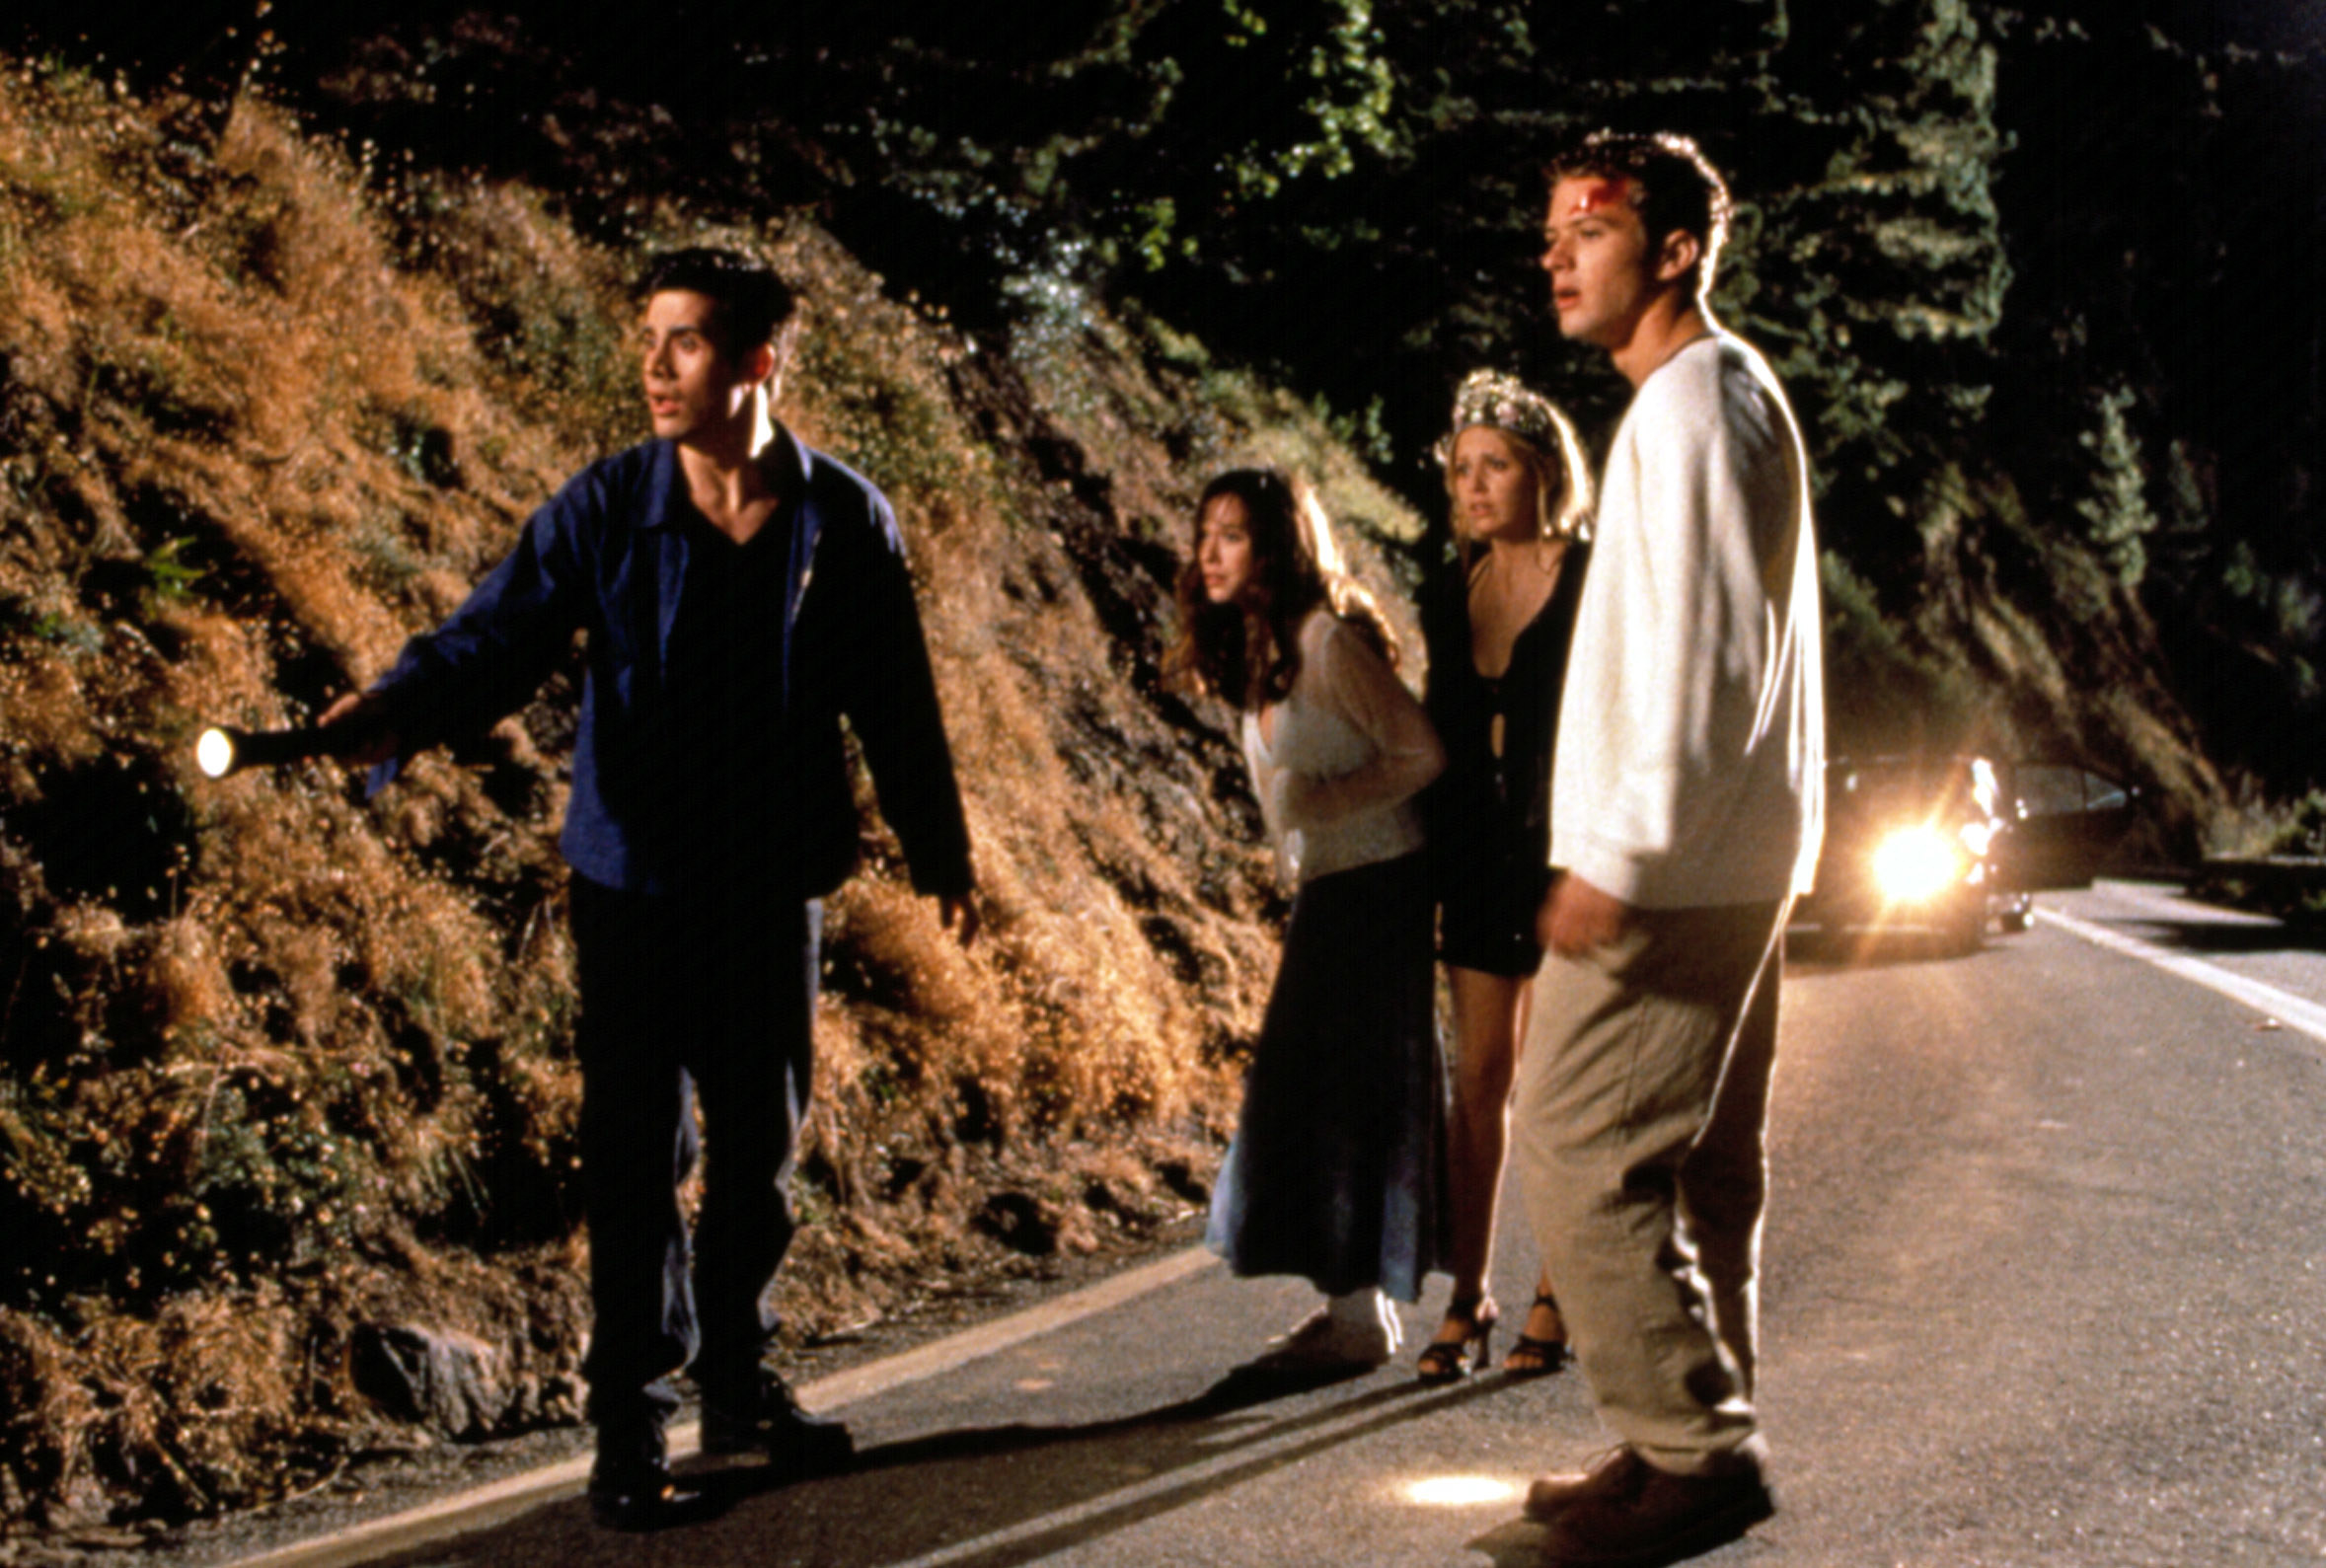 The cast stands in a road with flashlights